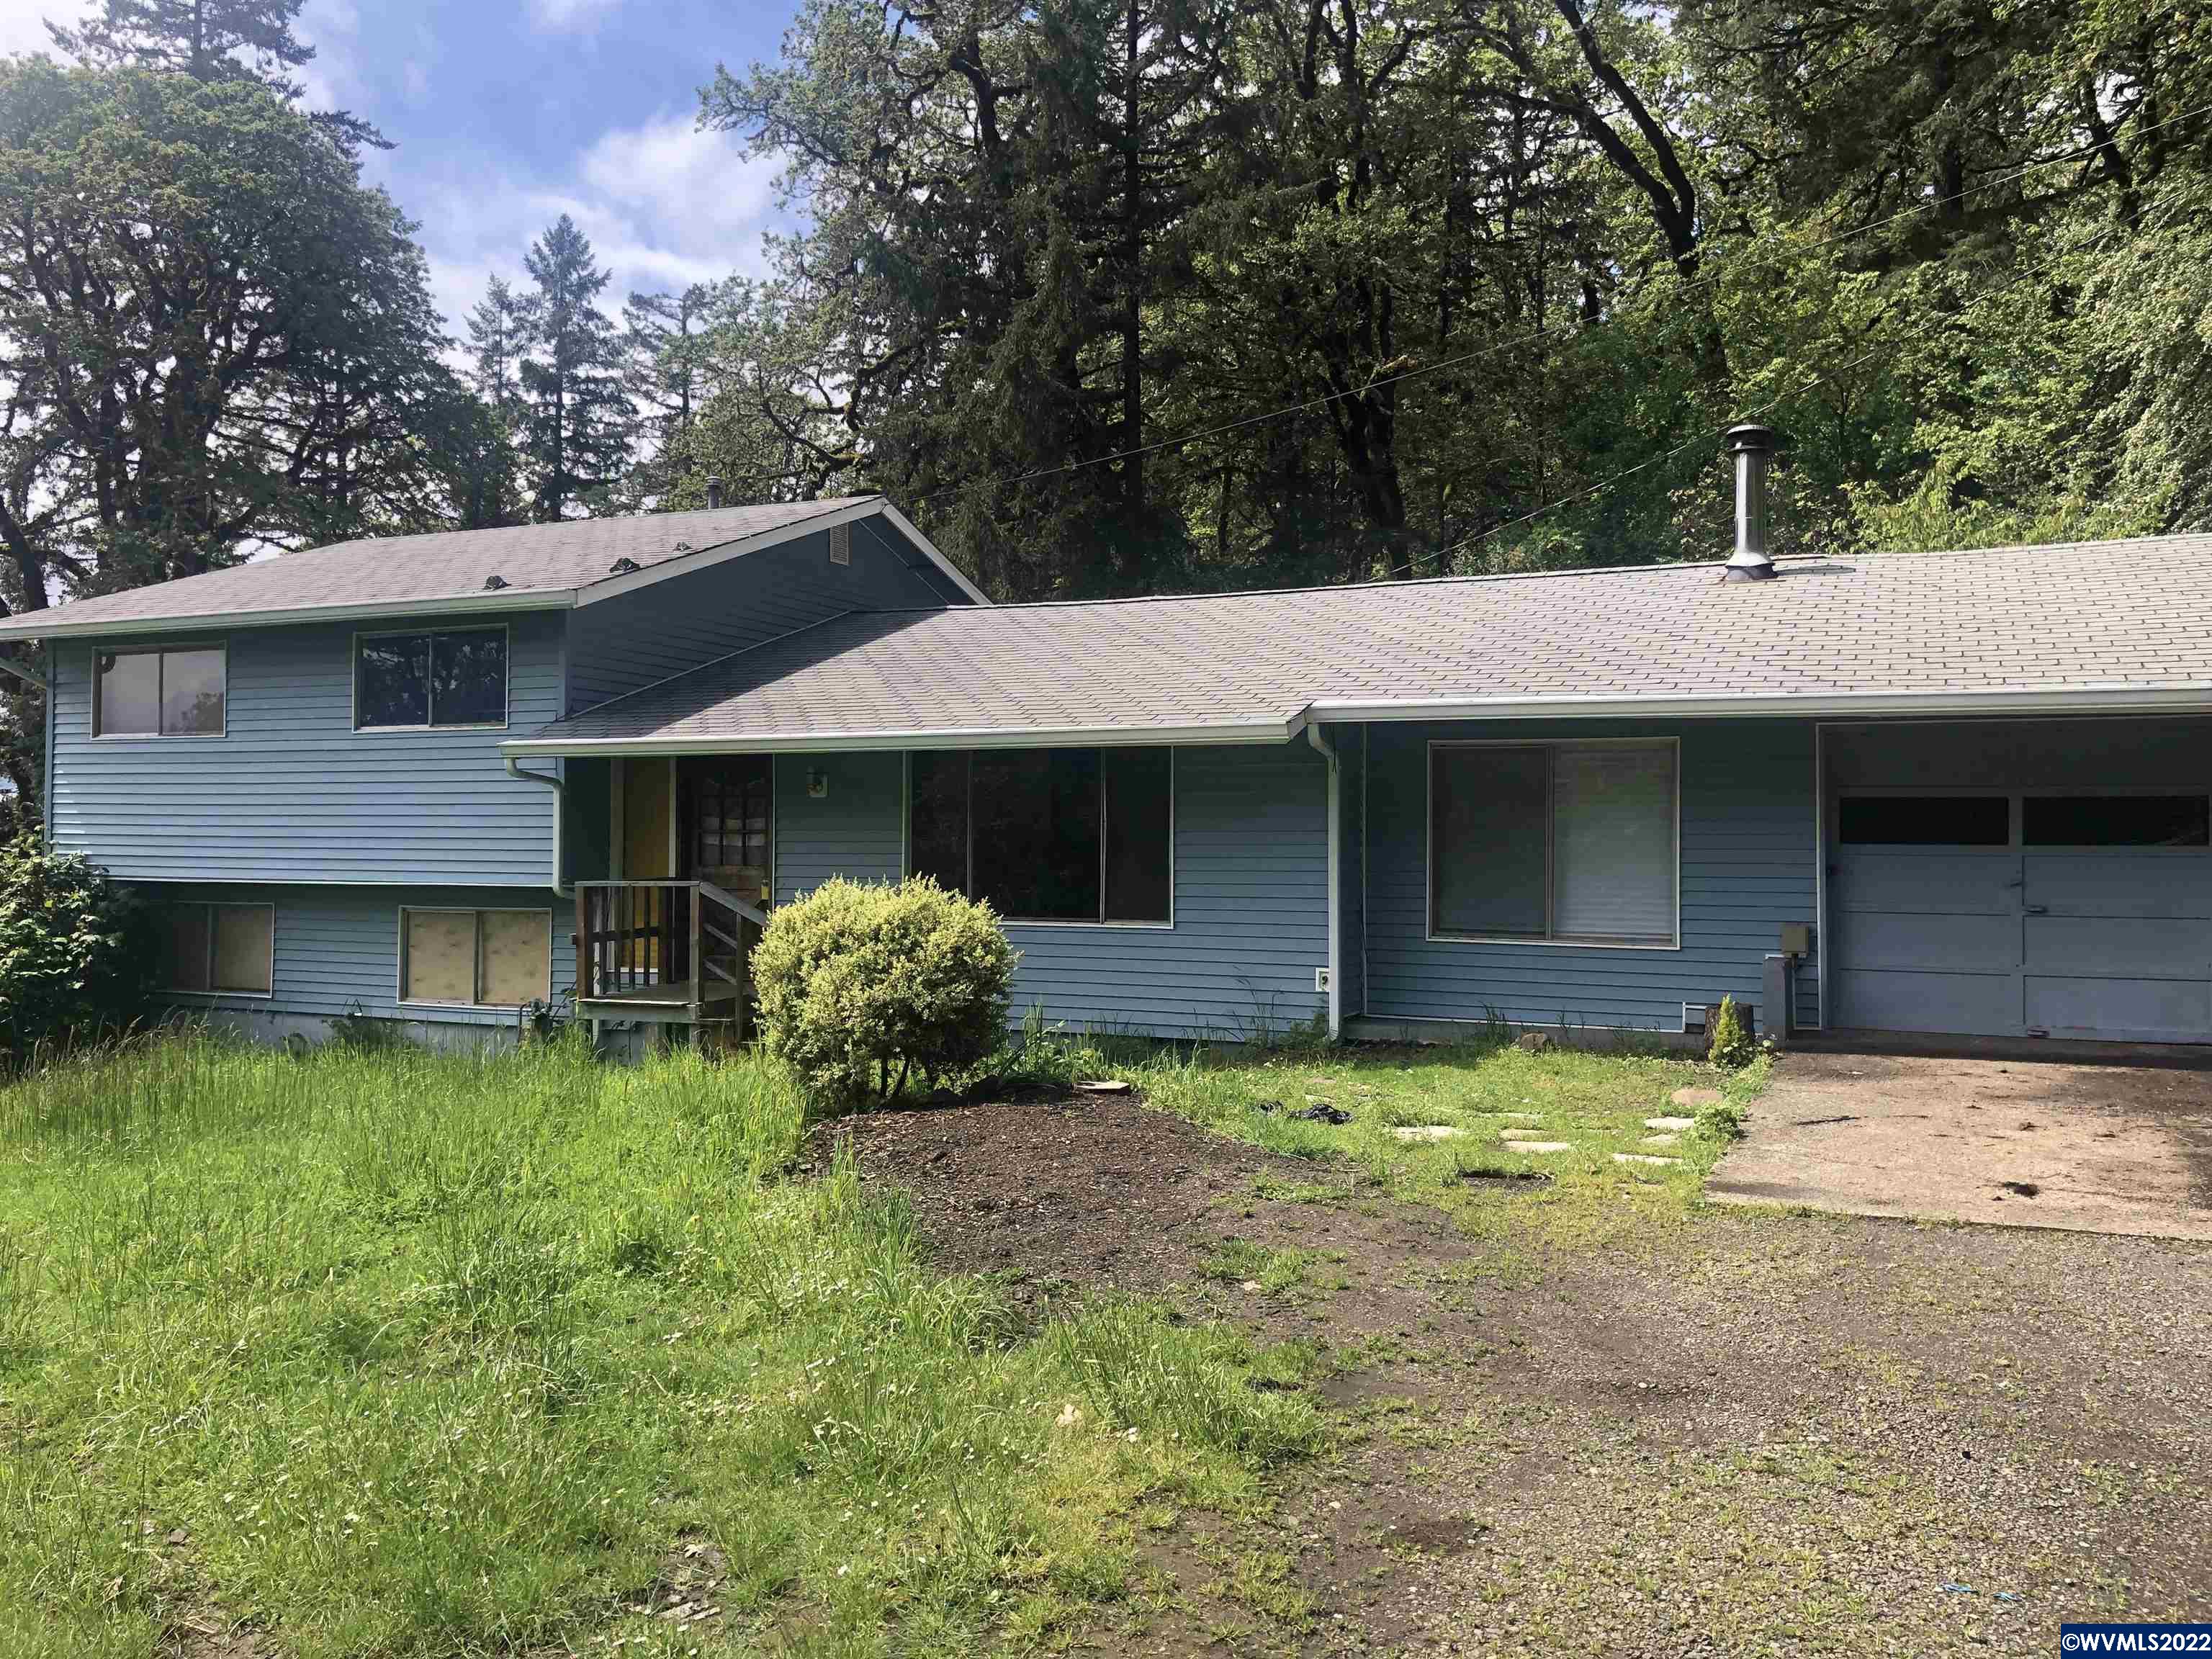 7735 NW Hoodview Cl, Corvallis, OR 97330